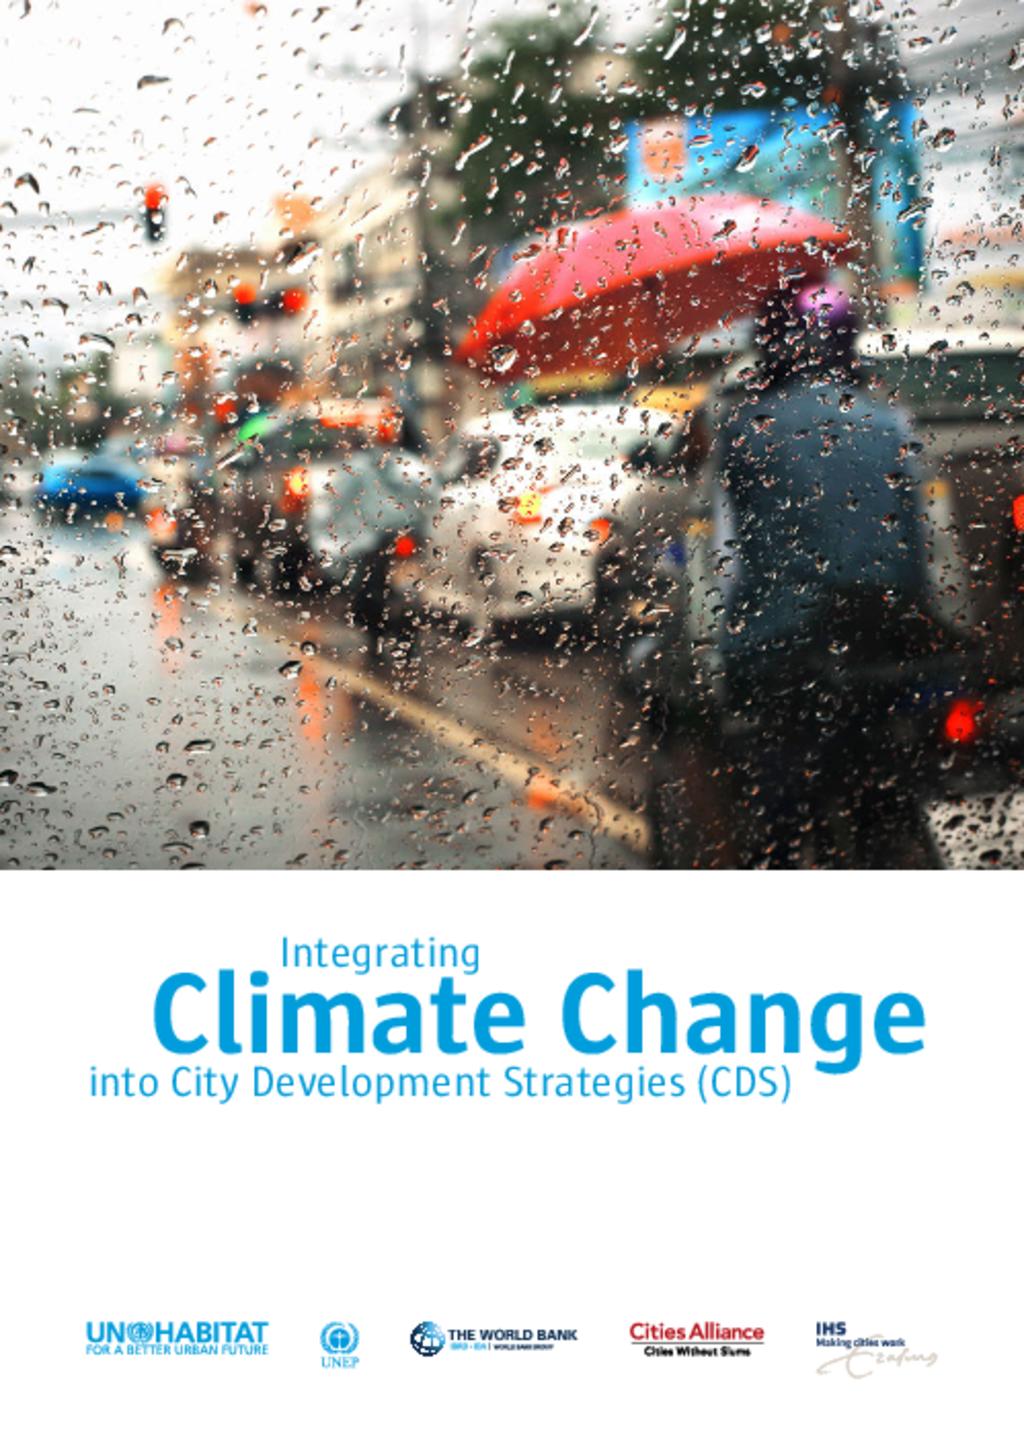 Climate change and city planning